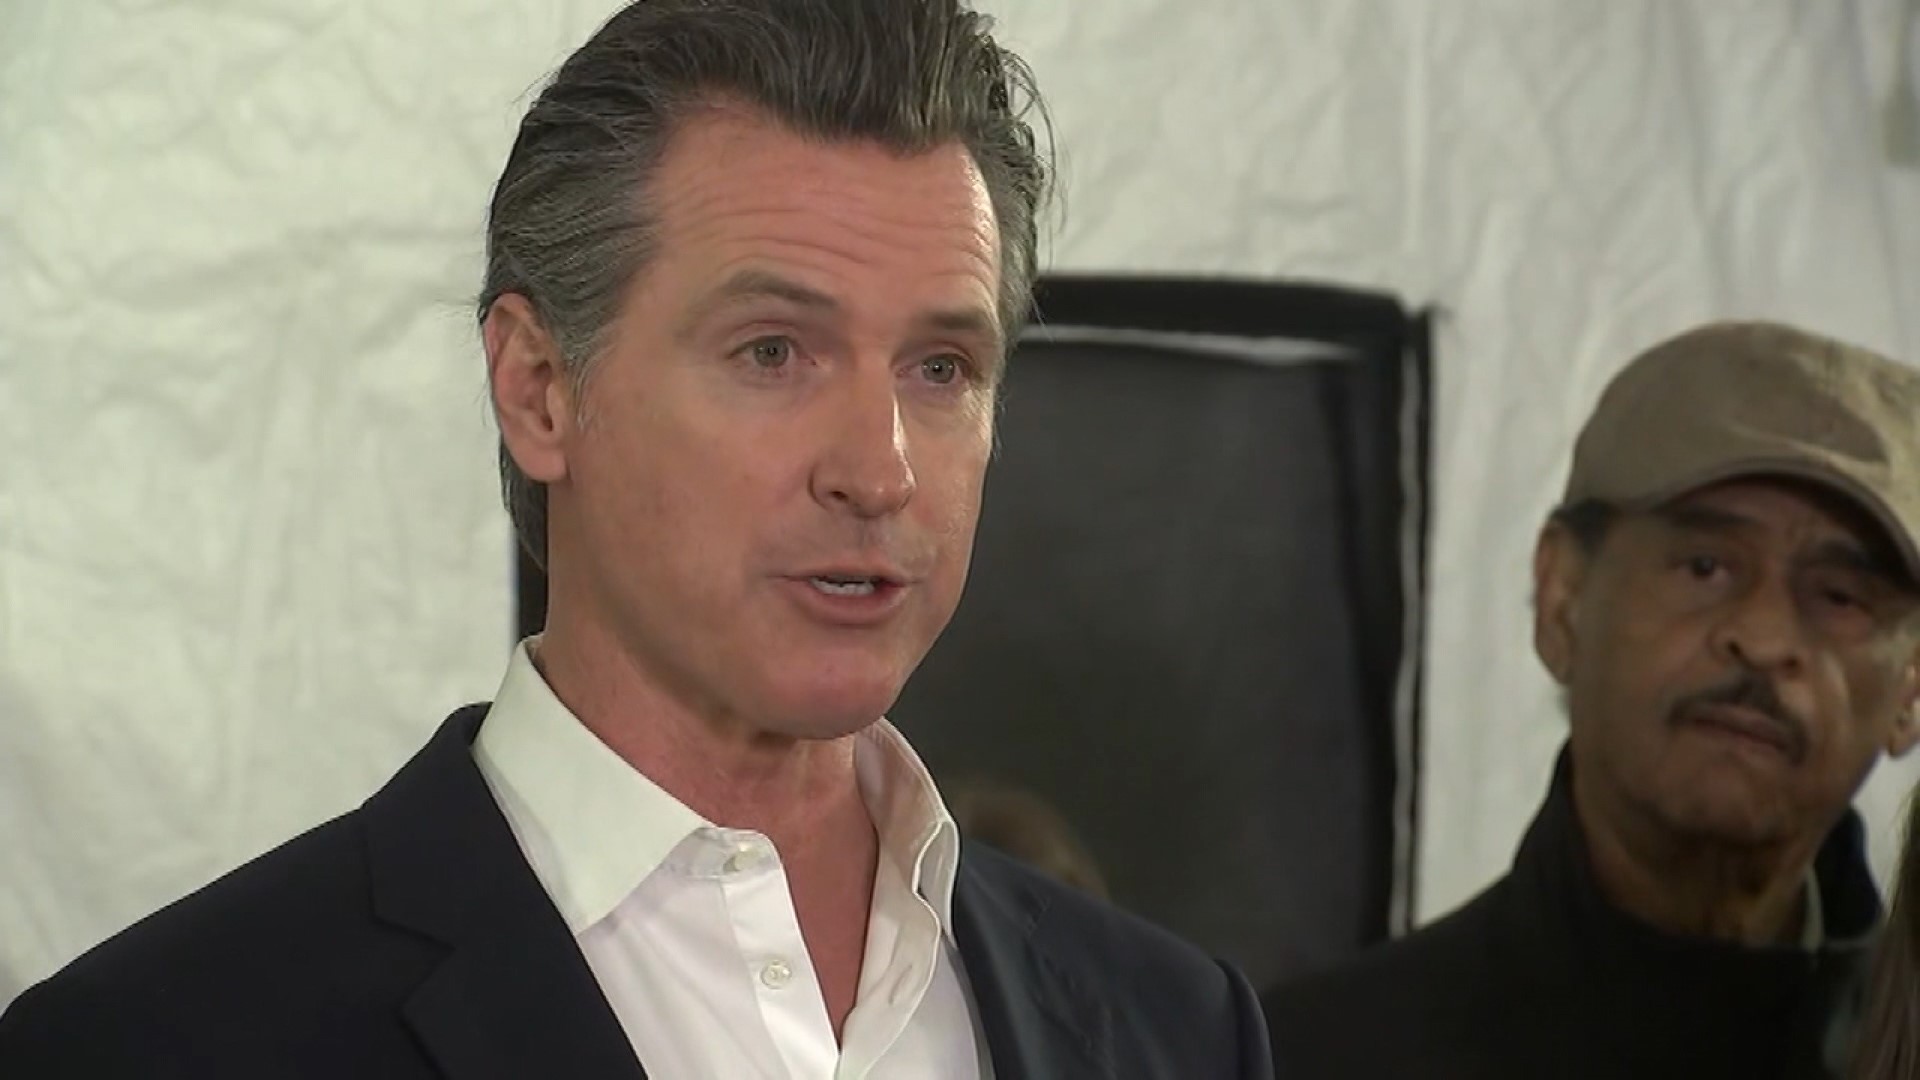 “The governor is supposed to set an example and this doesn’t help.” Experts say Gov. Newsom knows better and wouldn't advise the public to do what he did.